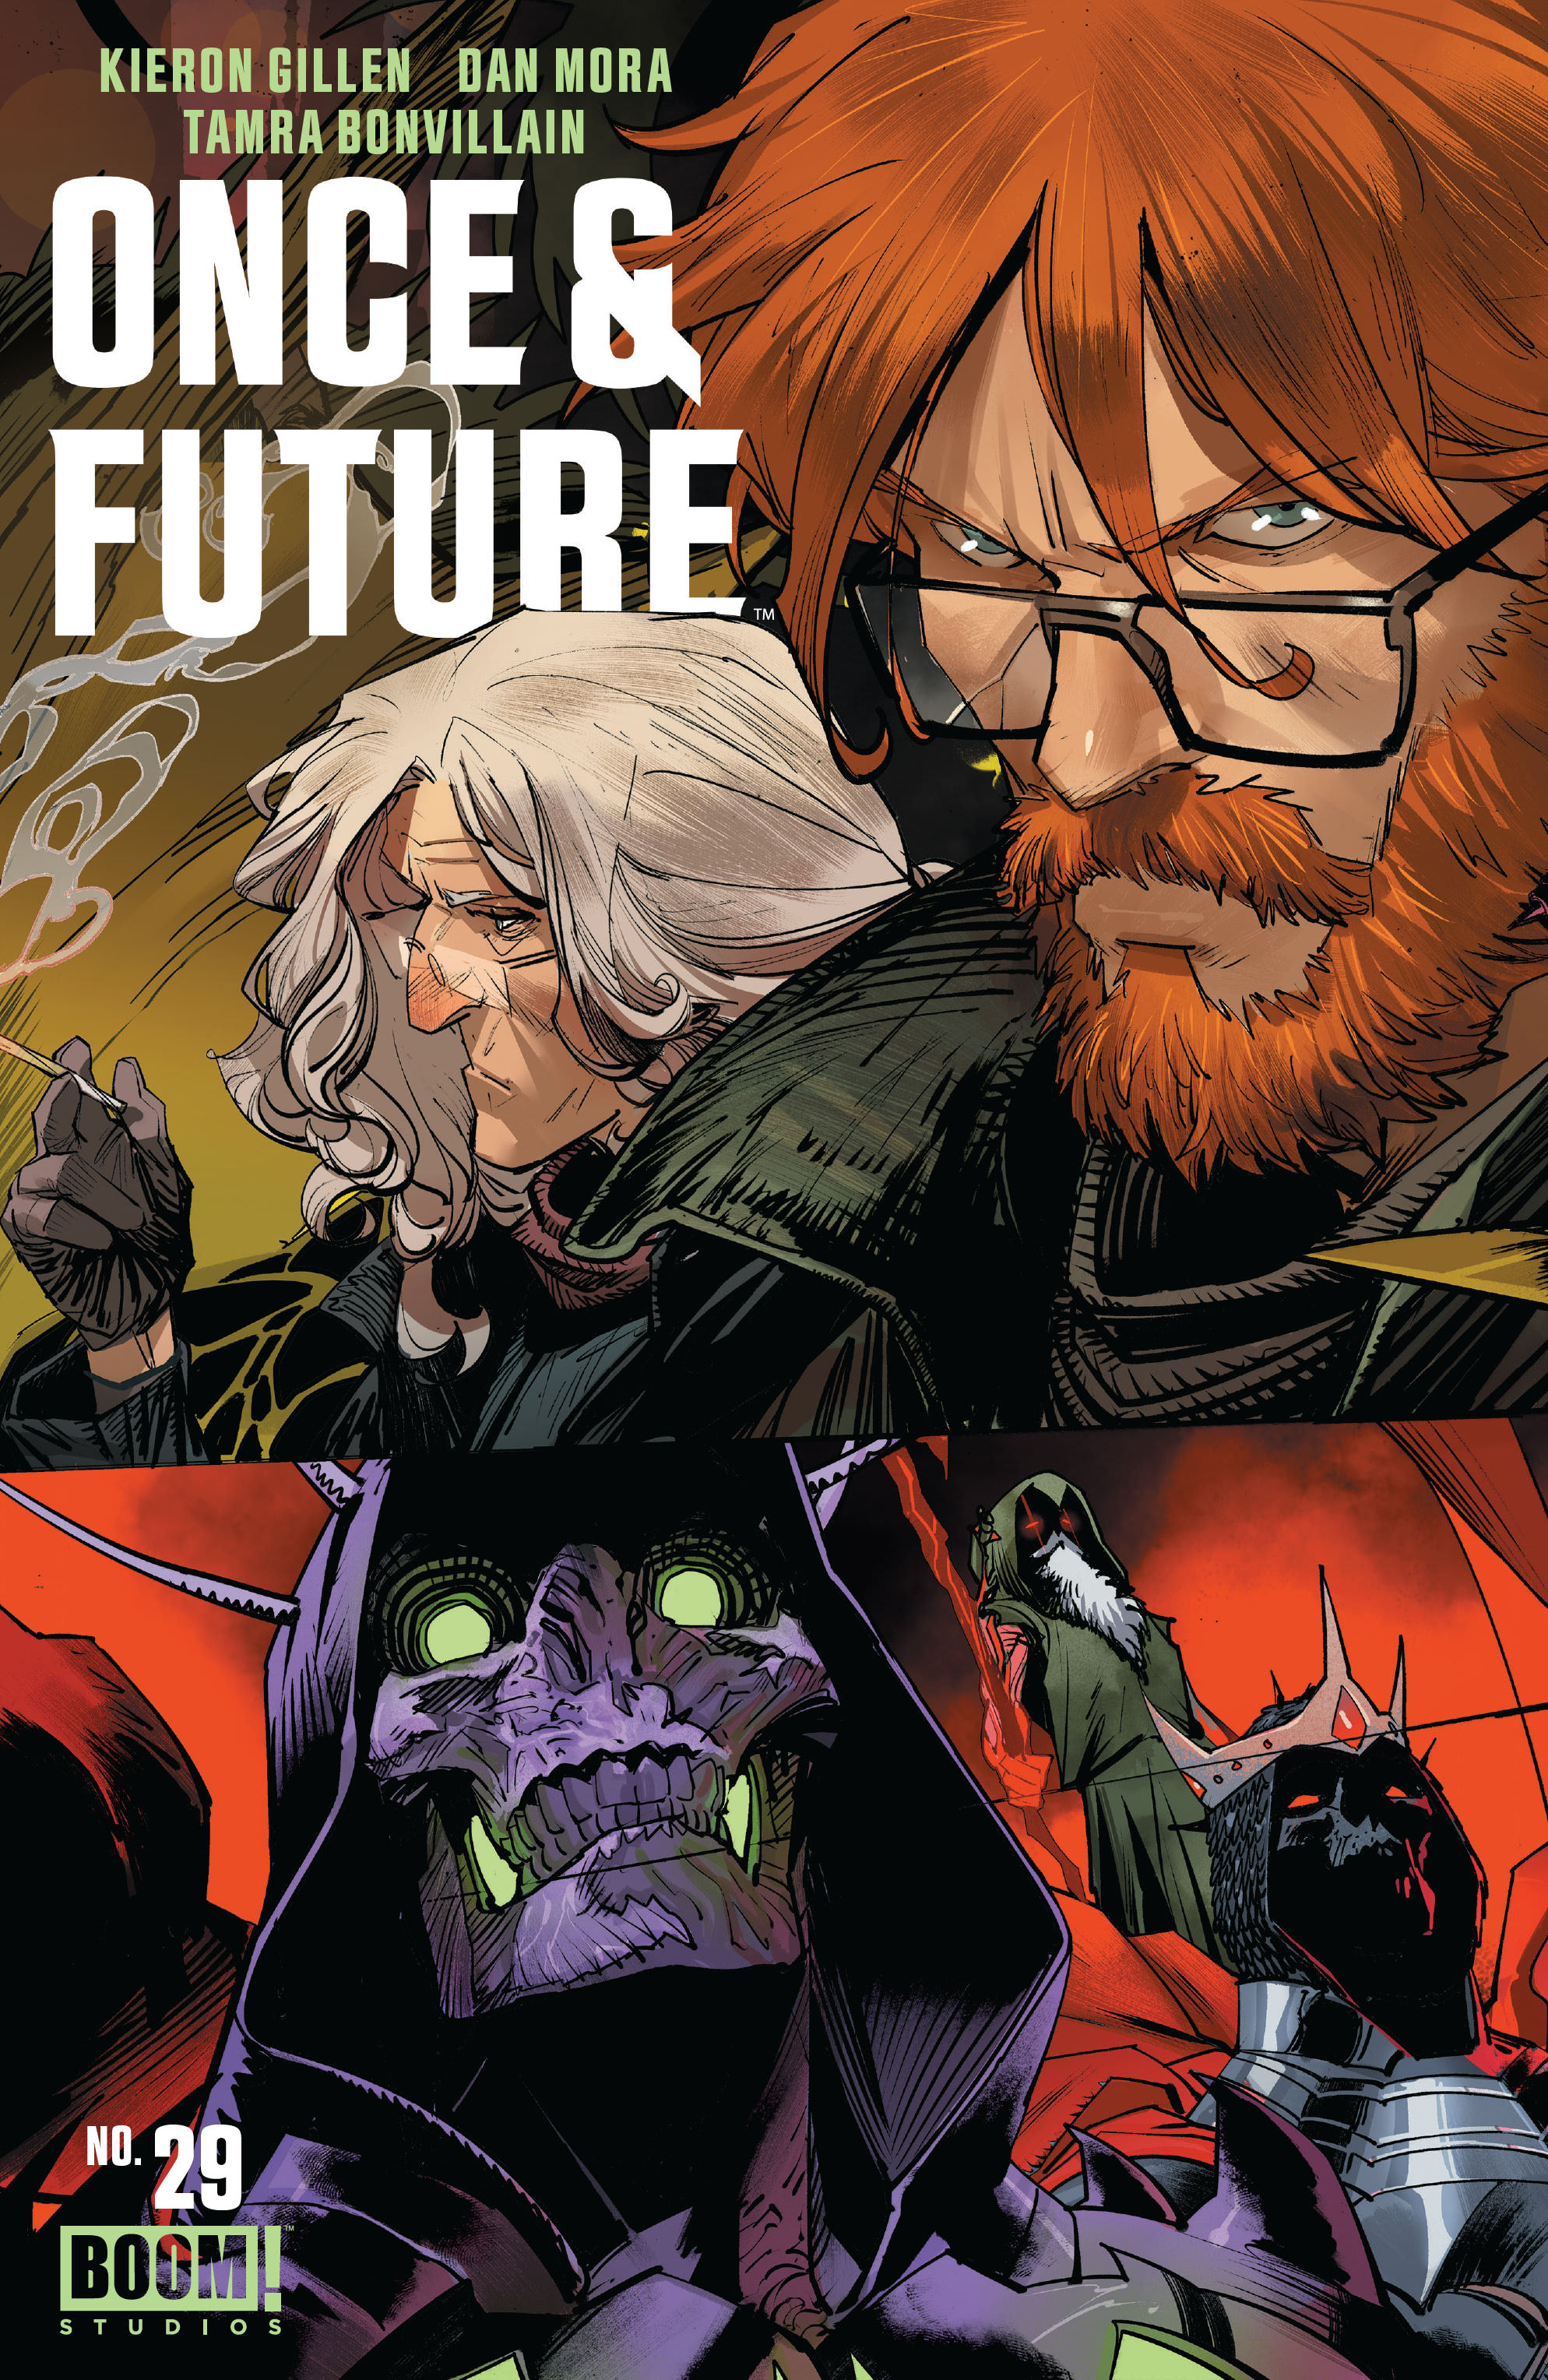 Read online Once & Future comic -  Issue #29 - 1